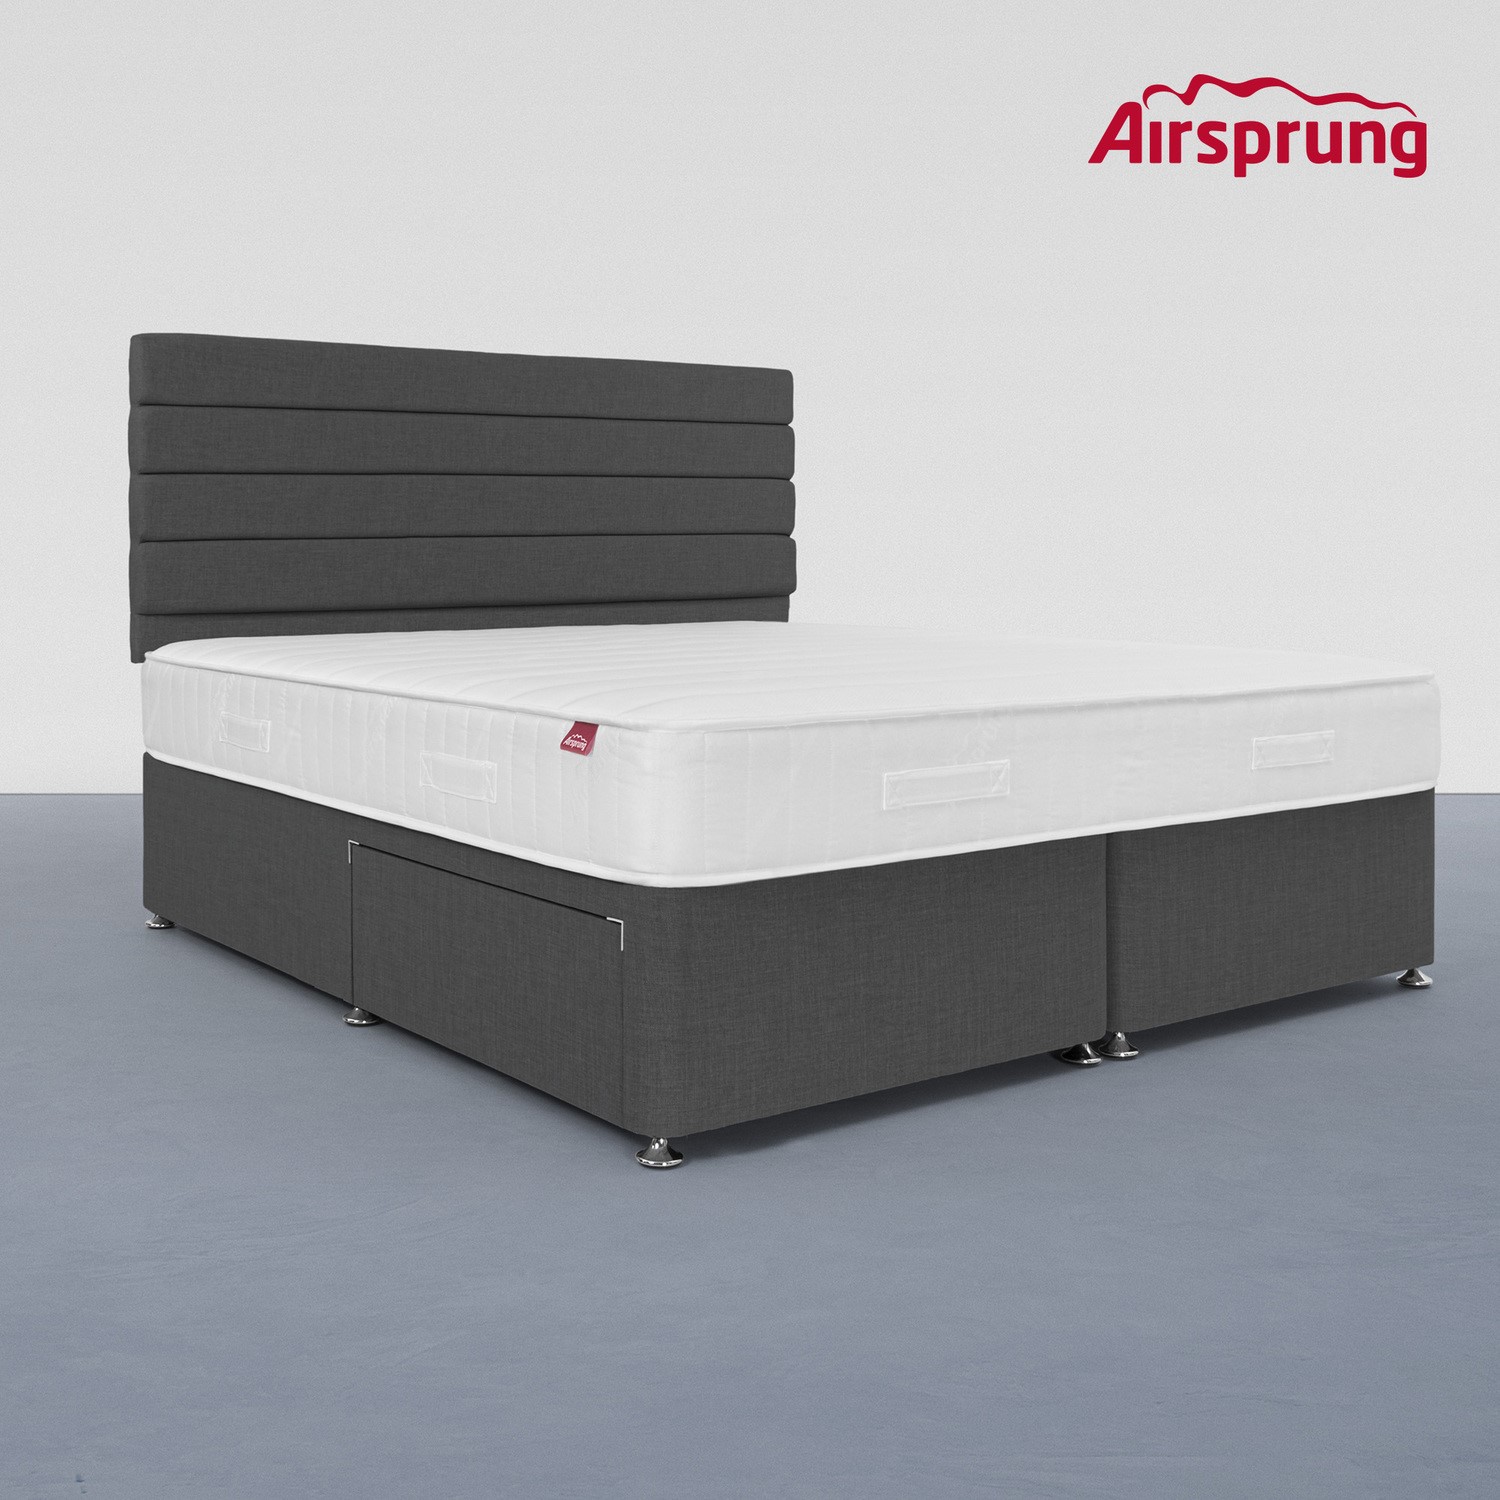 Photo of Airsprung super king 2 drawer divan bed with comfort mattress - charcoal